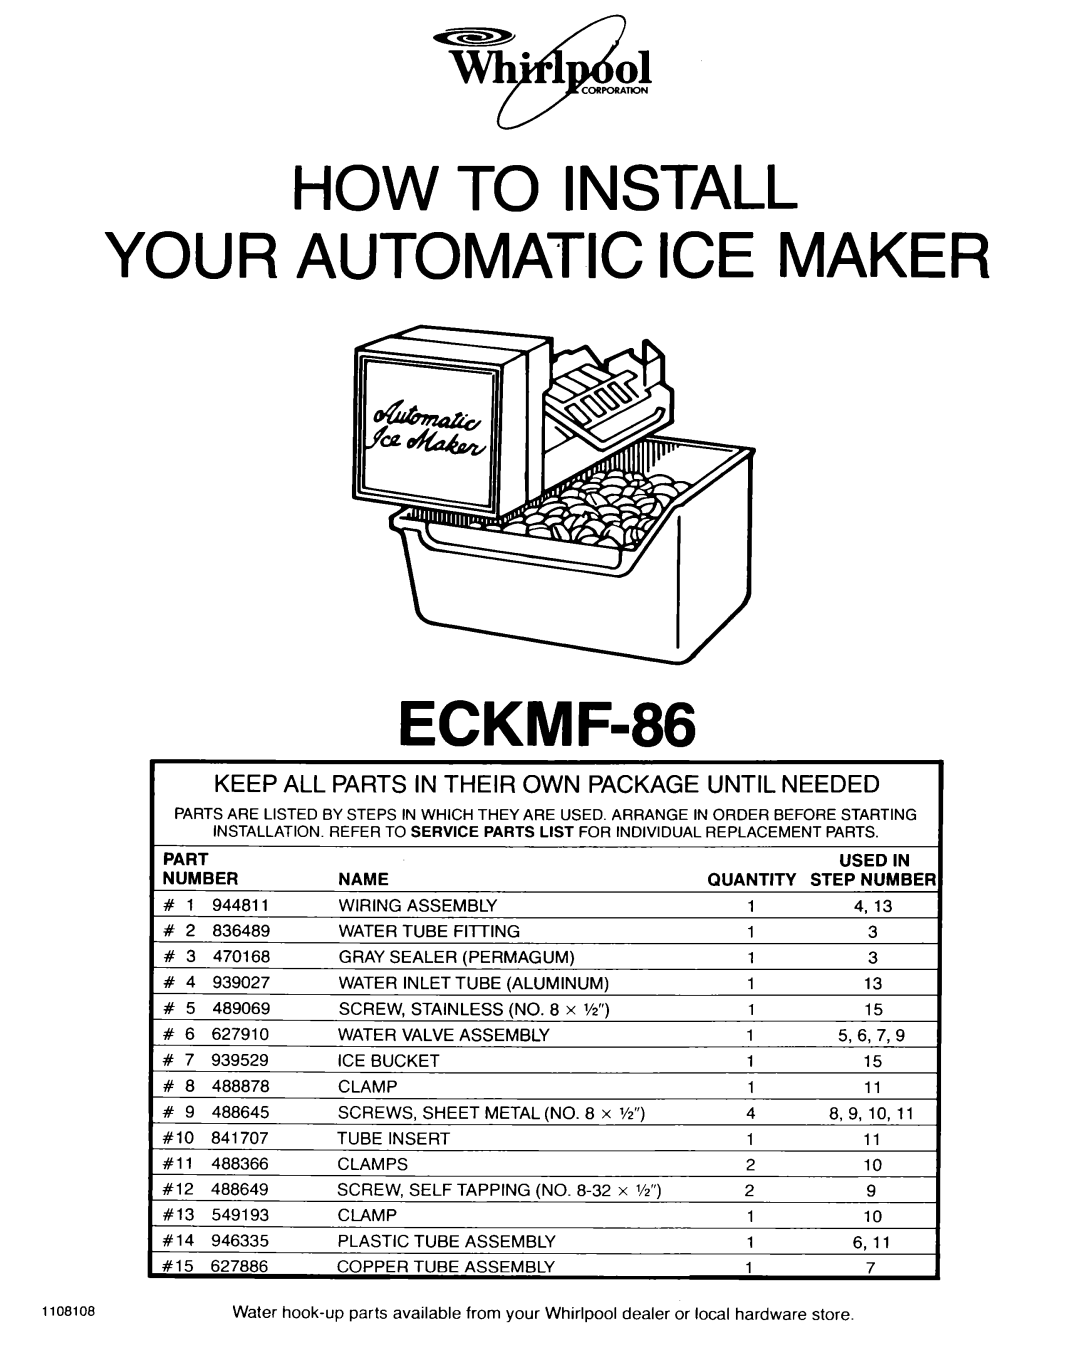 Whirlpool manual HOW TO INSTALL YOUR AUTOMATIC ICE MAKER ECKMF-86, Keep All Parts In Their Own Package Until Needed 